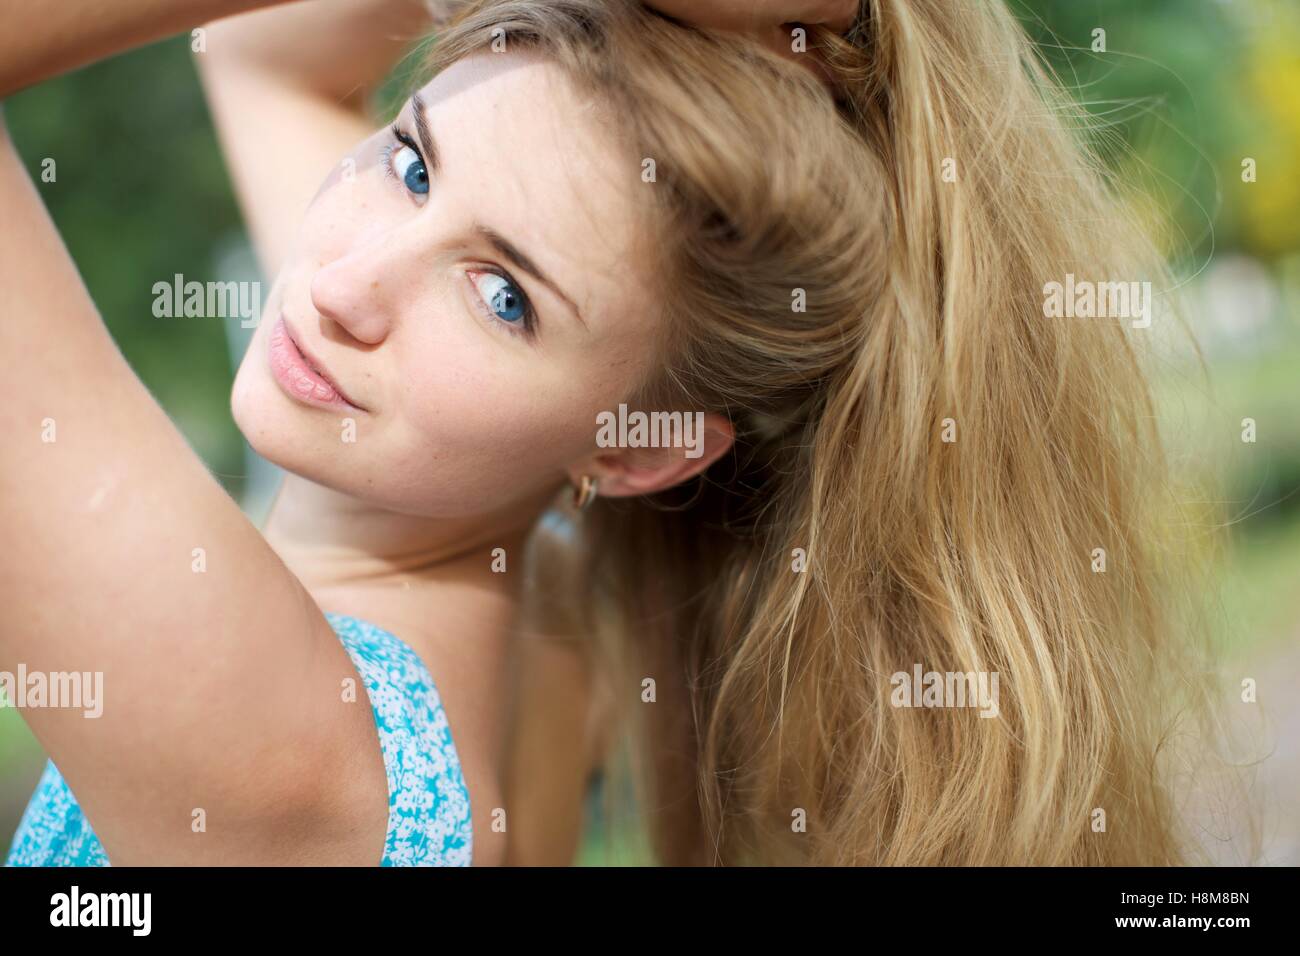 Closeup Blondie 23 year old in blue dress Stock Photo